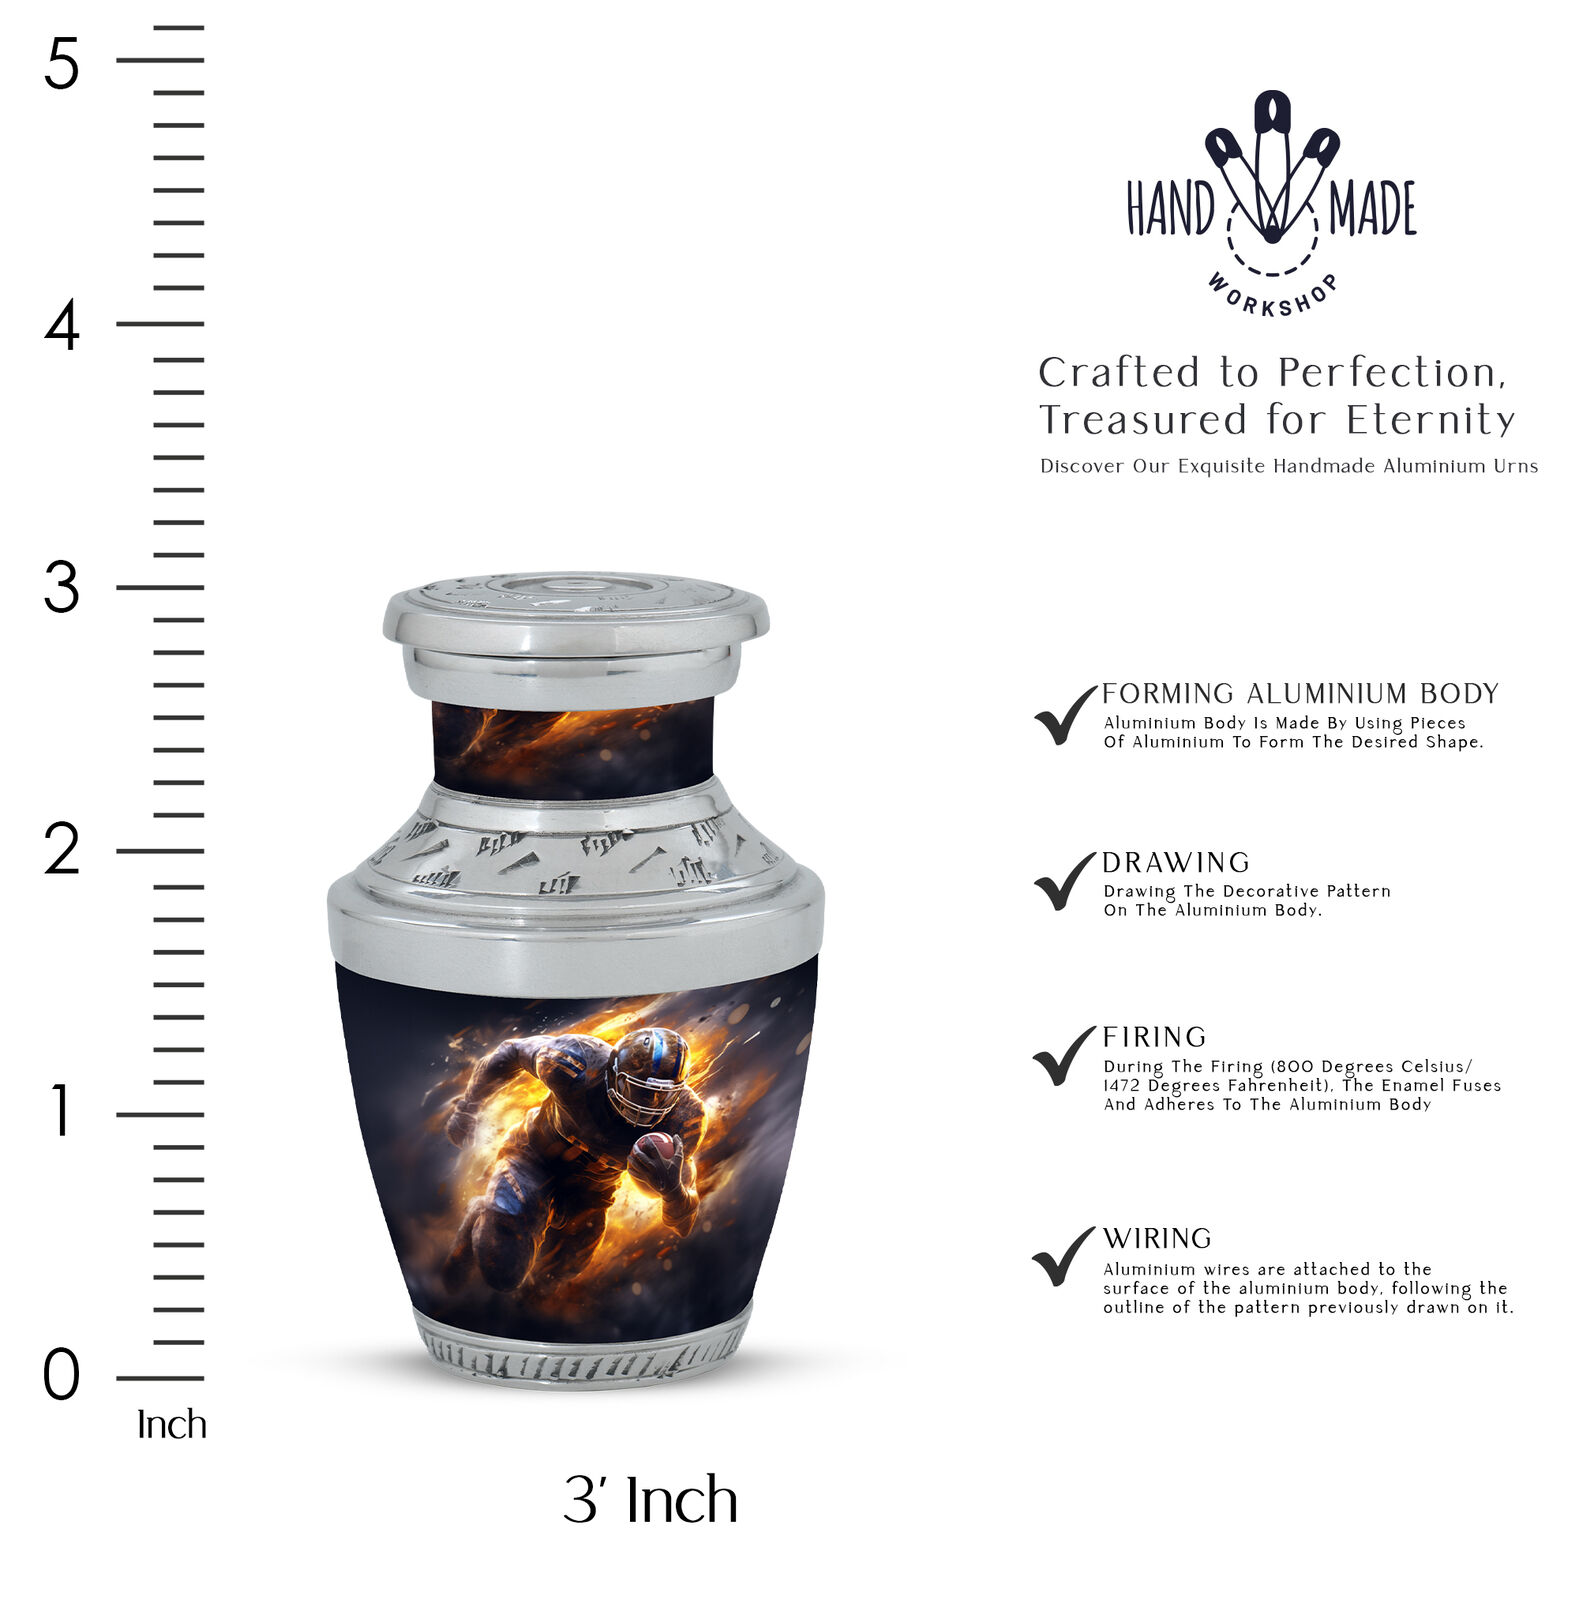 Flaming Football Player Small Cremation Urns For Human Ashes 3 Inch Urns